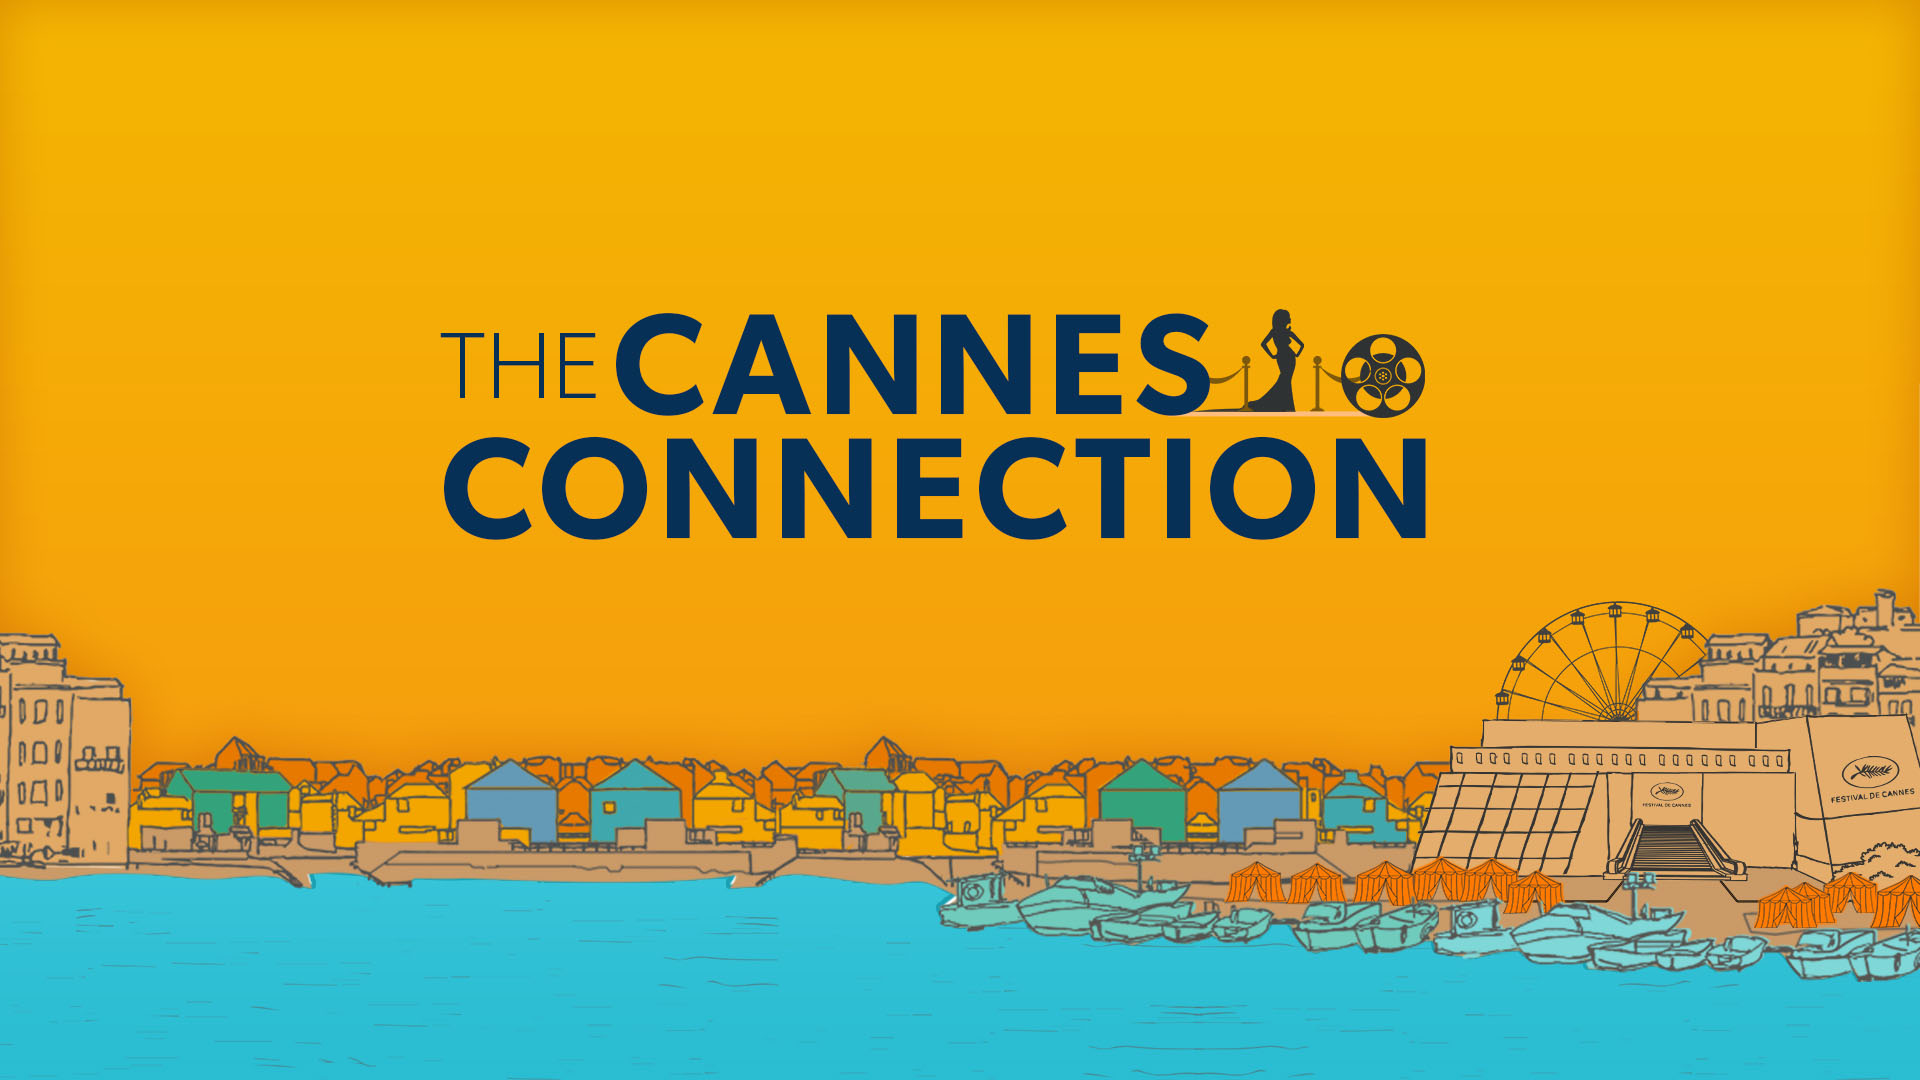 The Cannes Connection